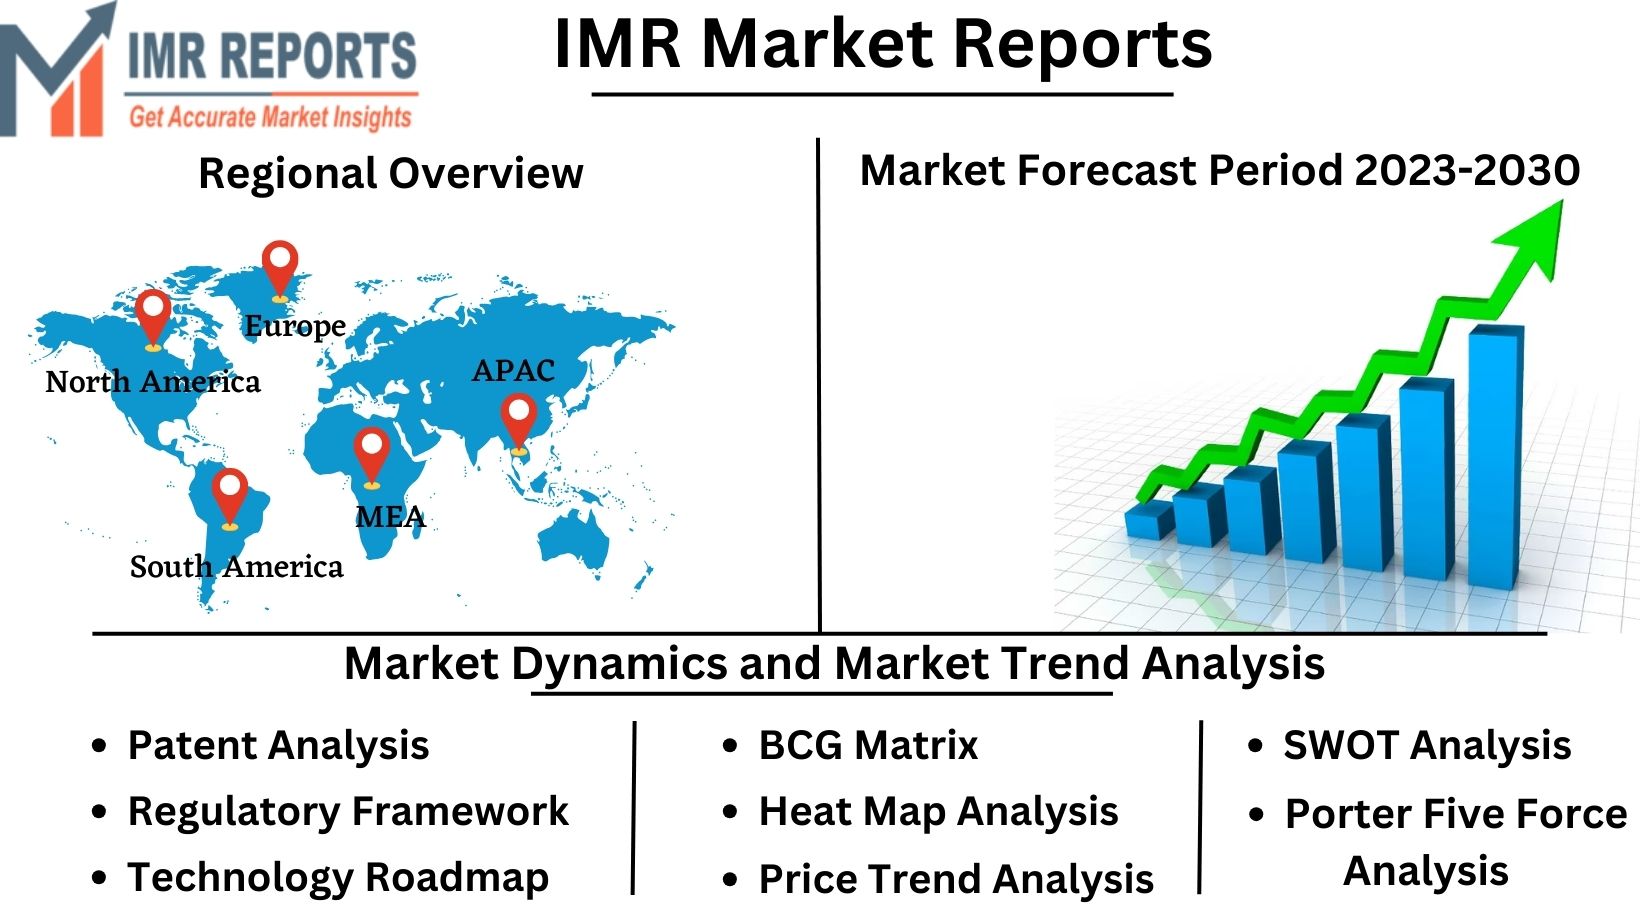 IMR_Market_Reports_(1)88